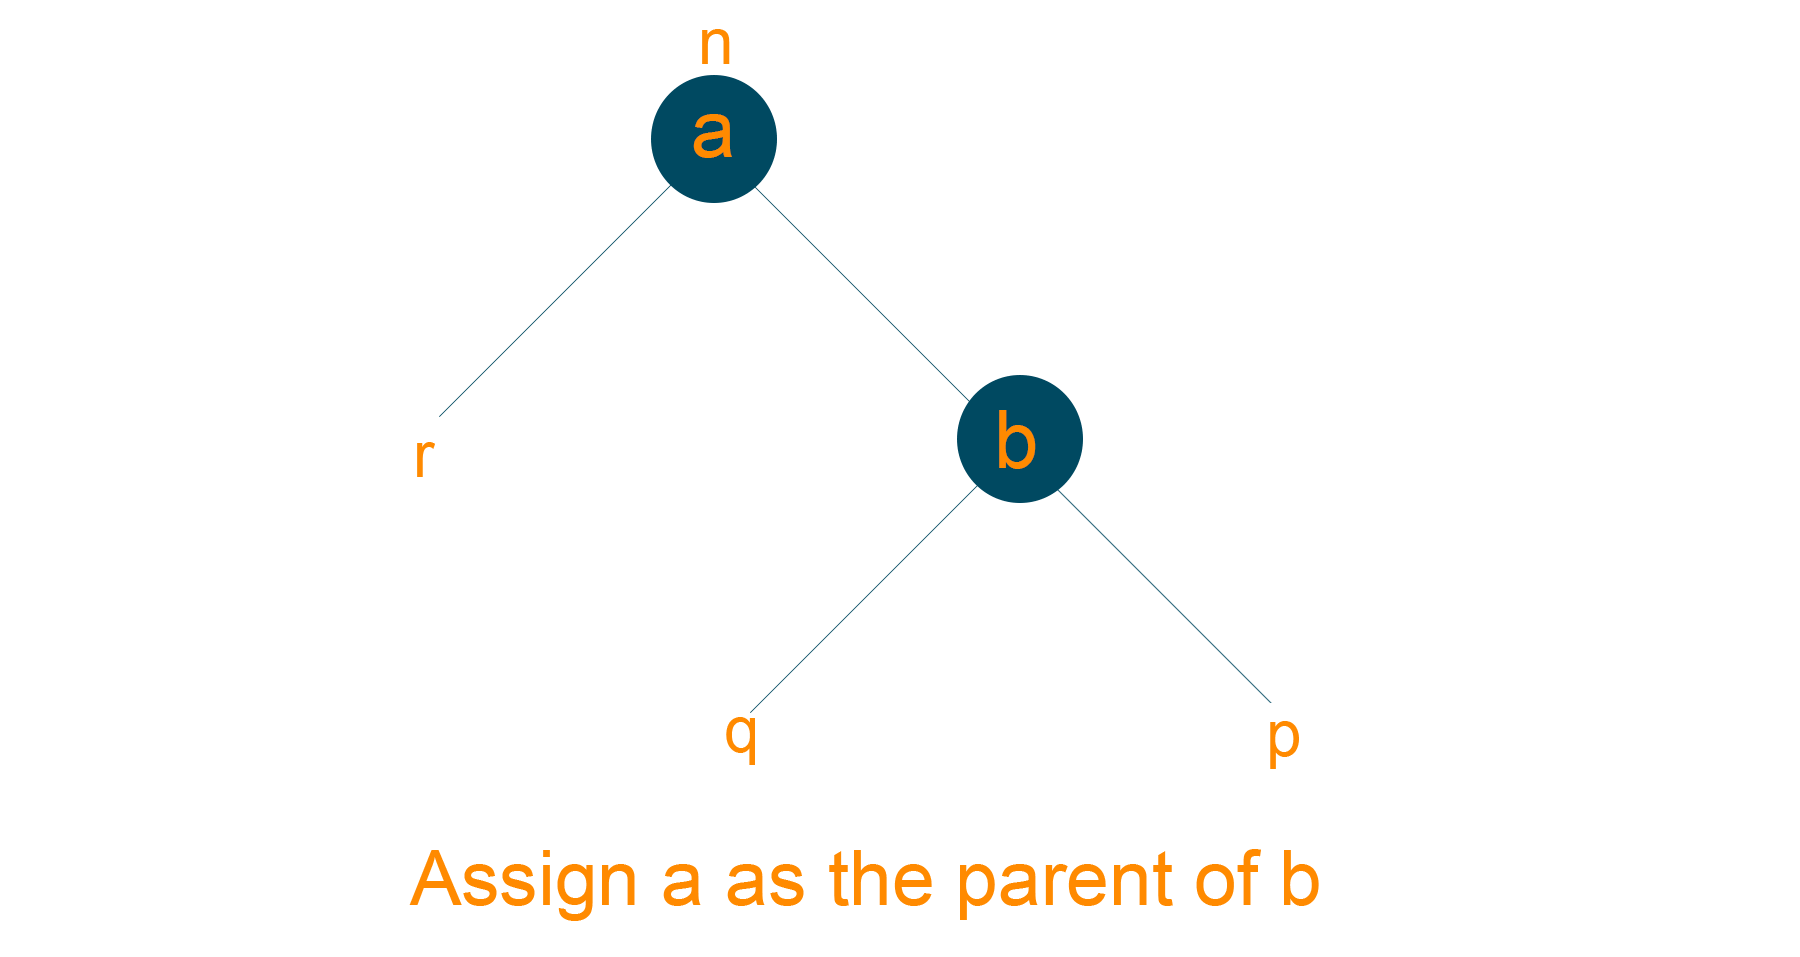 Assigning A as the parent of B